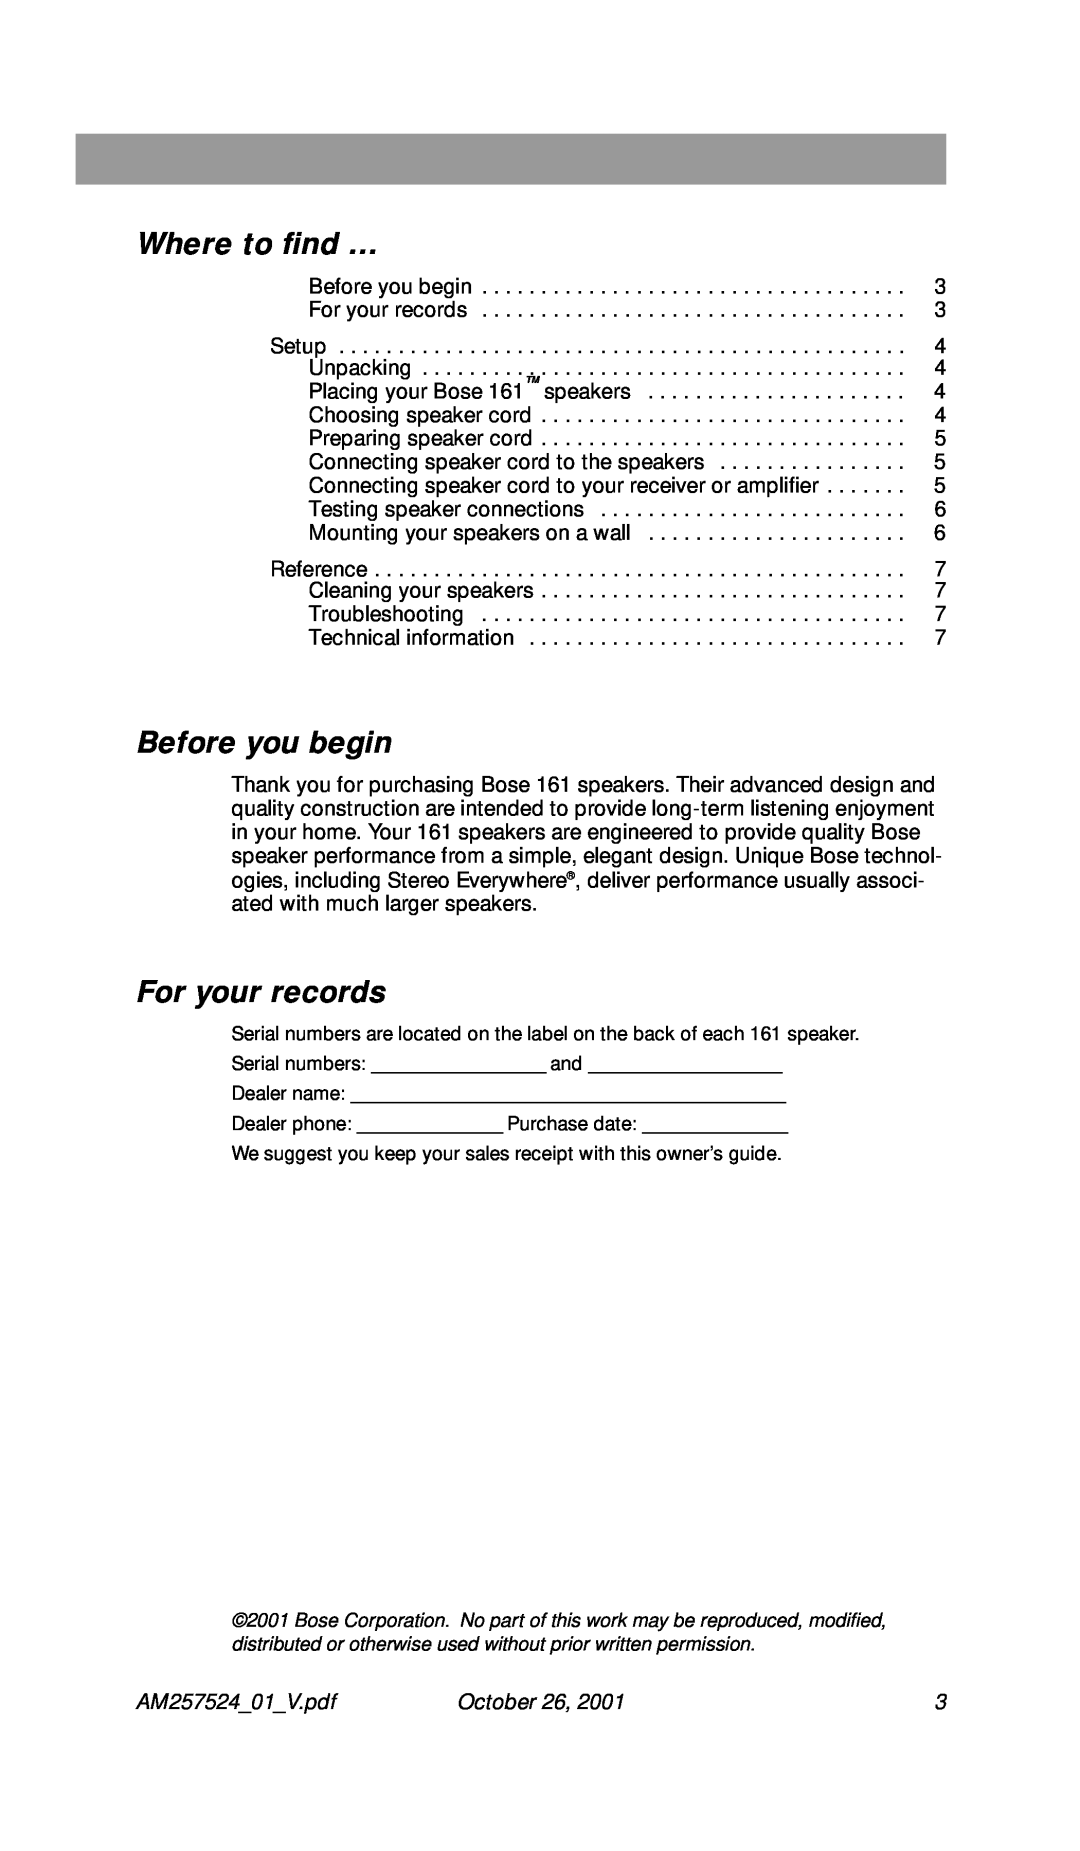 Bose Speakers manual Where to ﬁnd …, Before you begin, For your records, October 